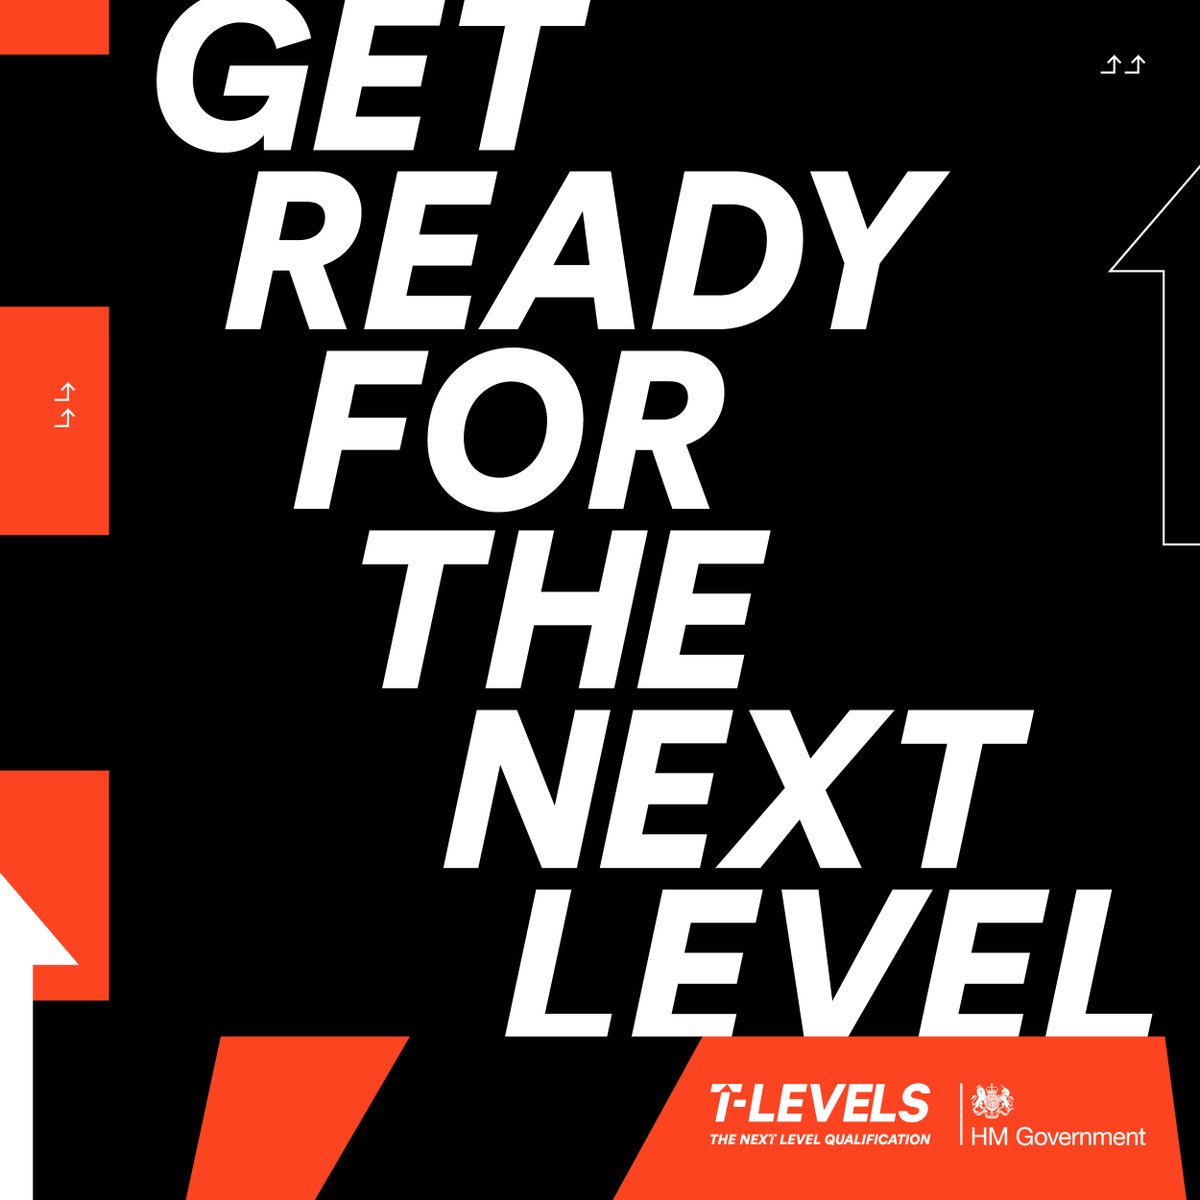 It’s Open Day season – what choices are you exploring? T Levels are a 2-year qualifications that you can do as an alternative to A levels, other post-16 courses or an apprenticeship. Find out more about your local training providers by visiting tlevels.gov.uk/students/find